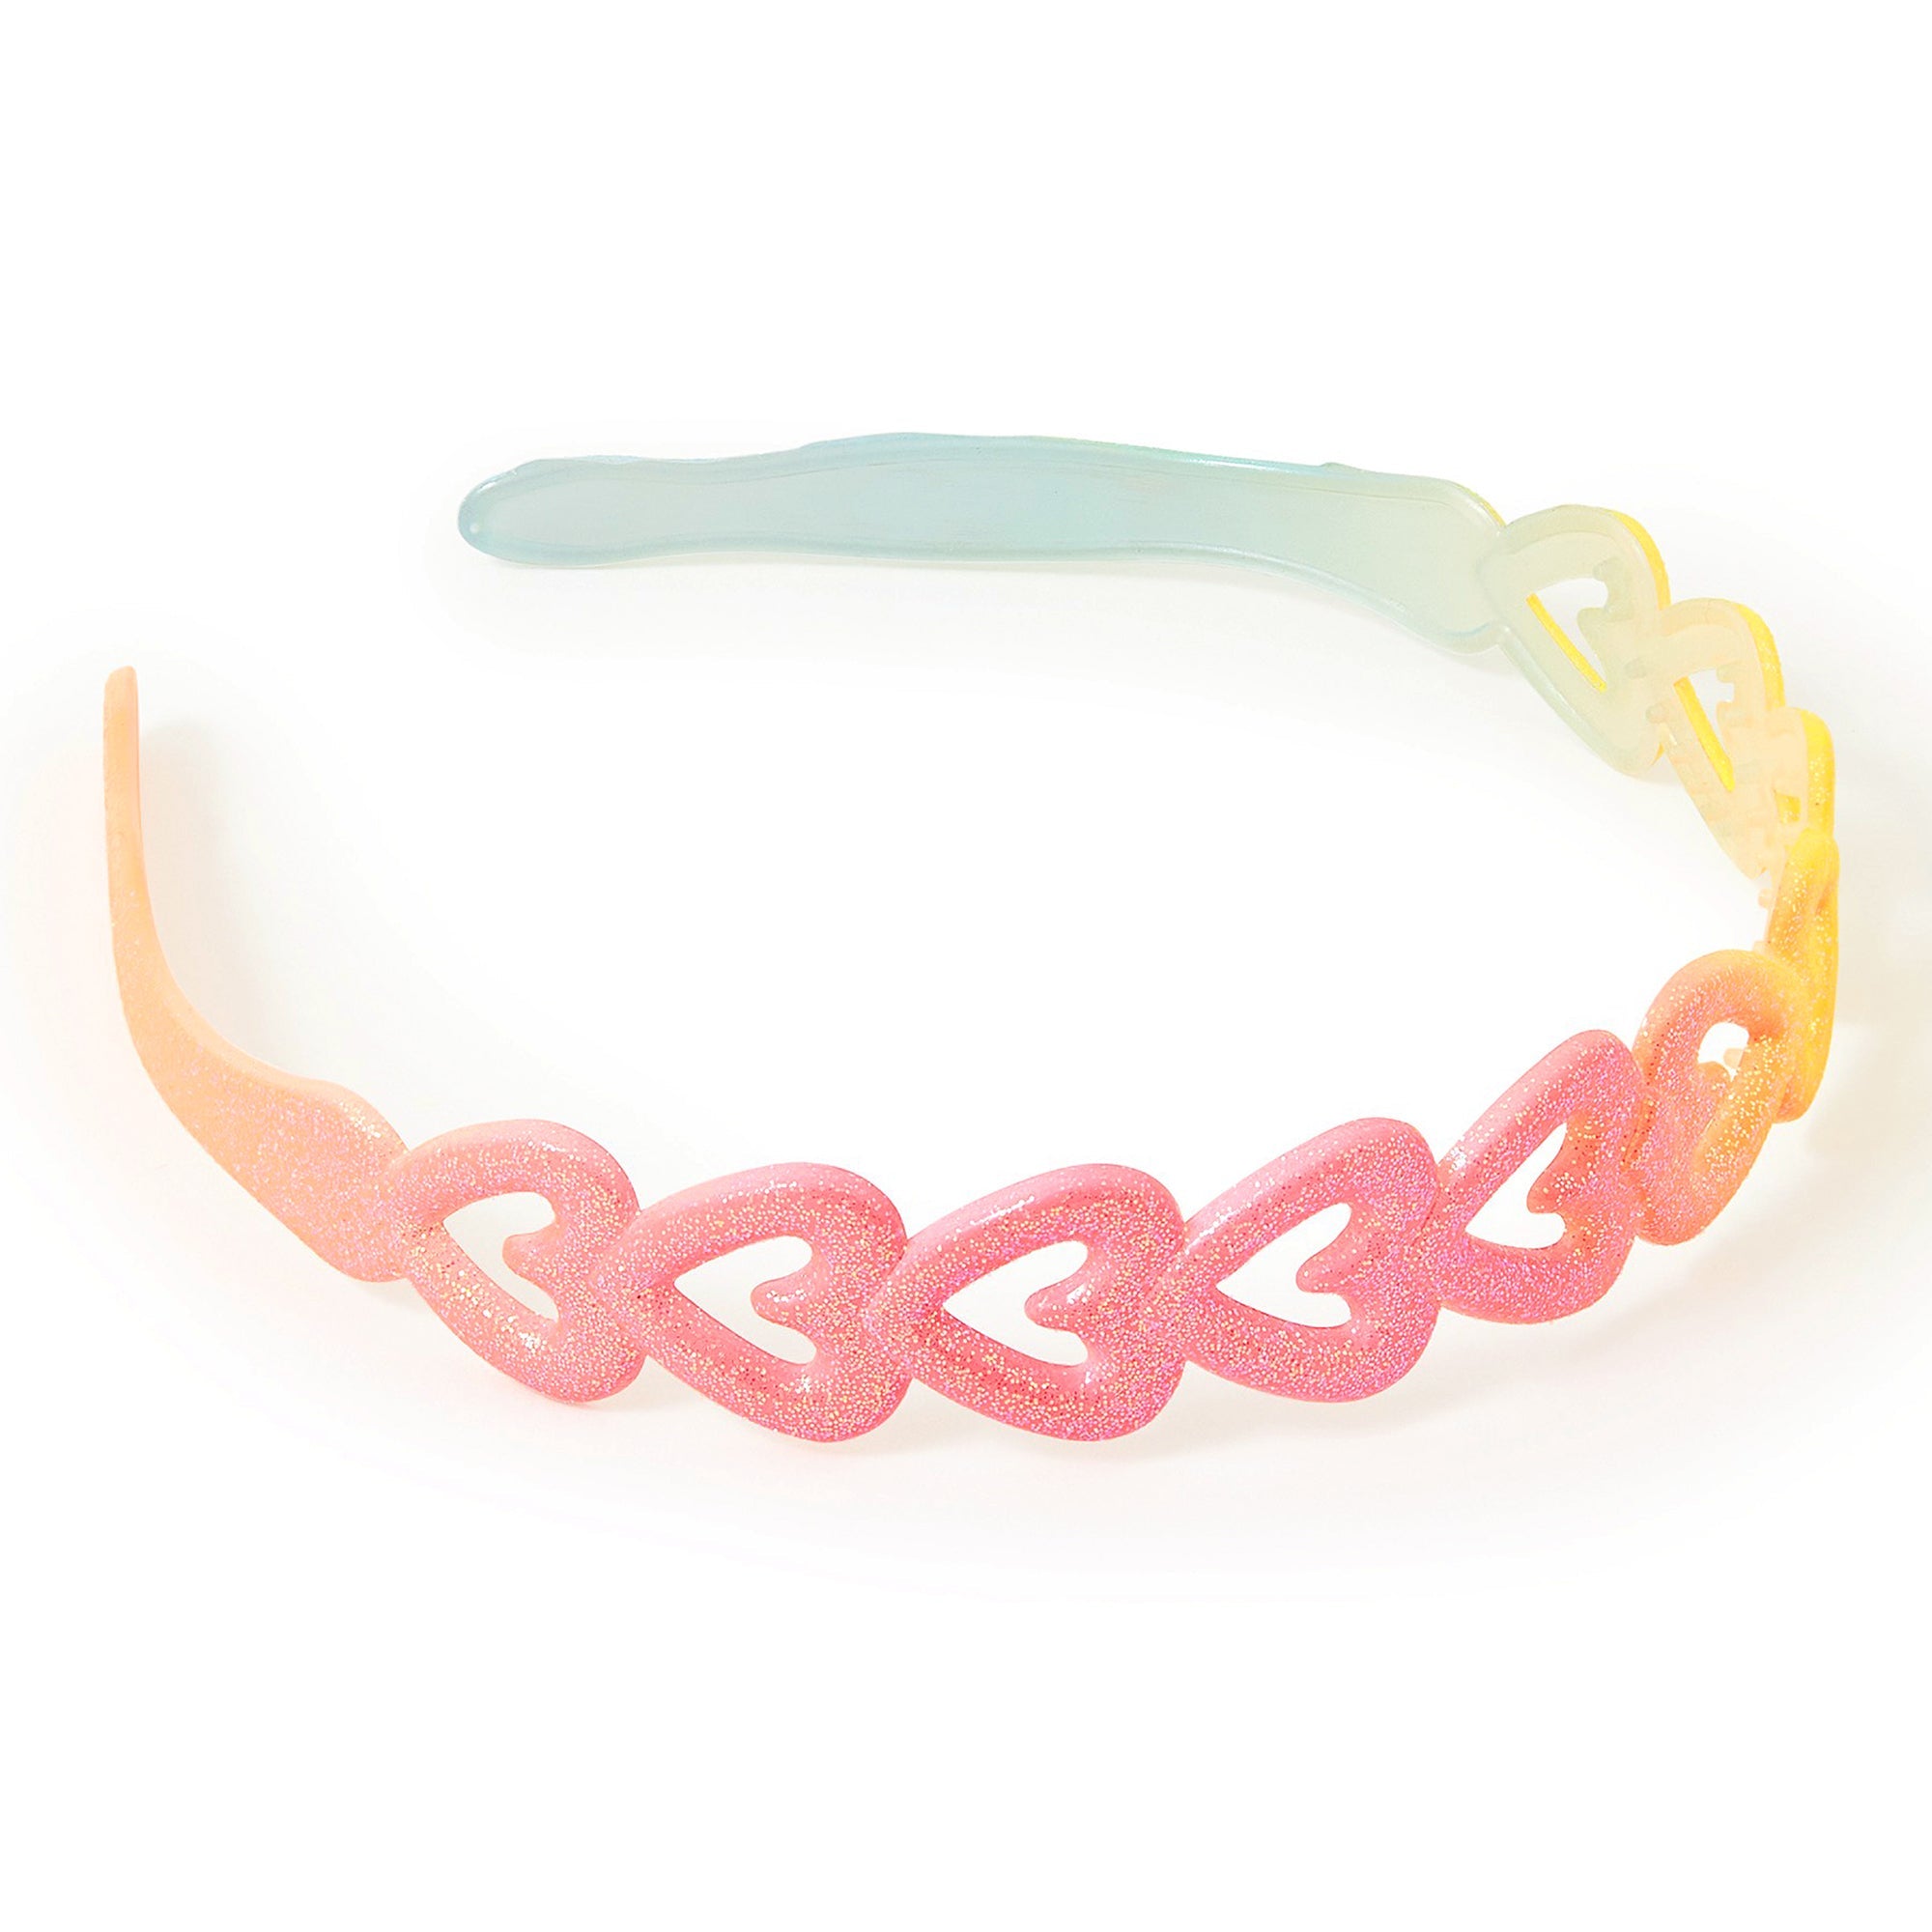 Accessorize London Girl's Ombre Sparkle Alice Hair Band